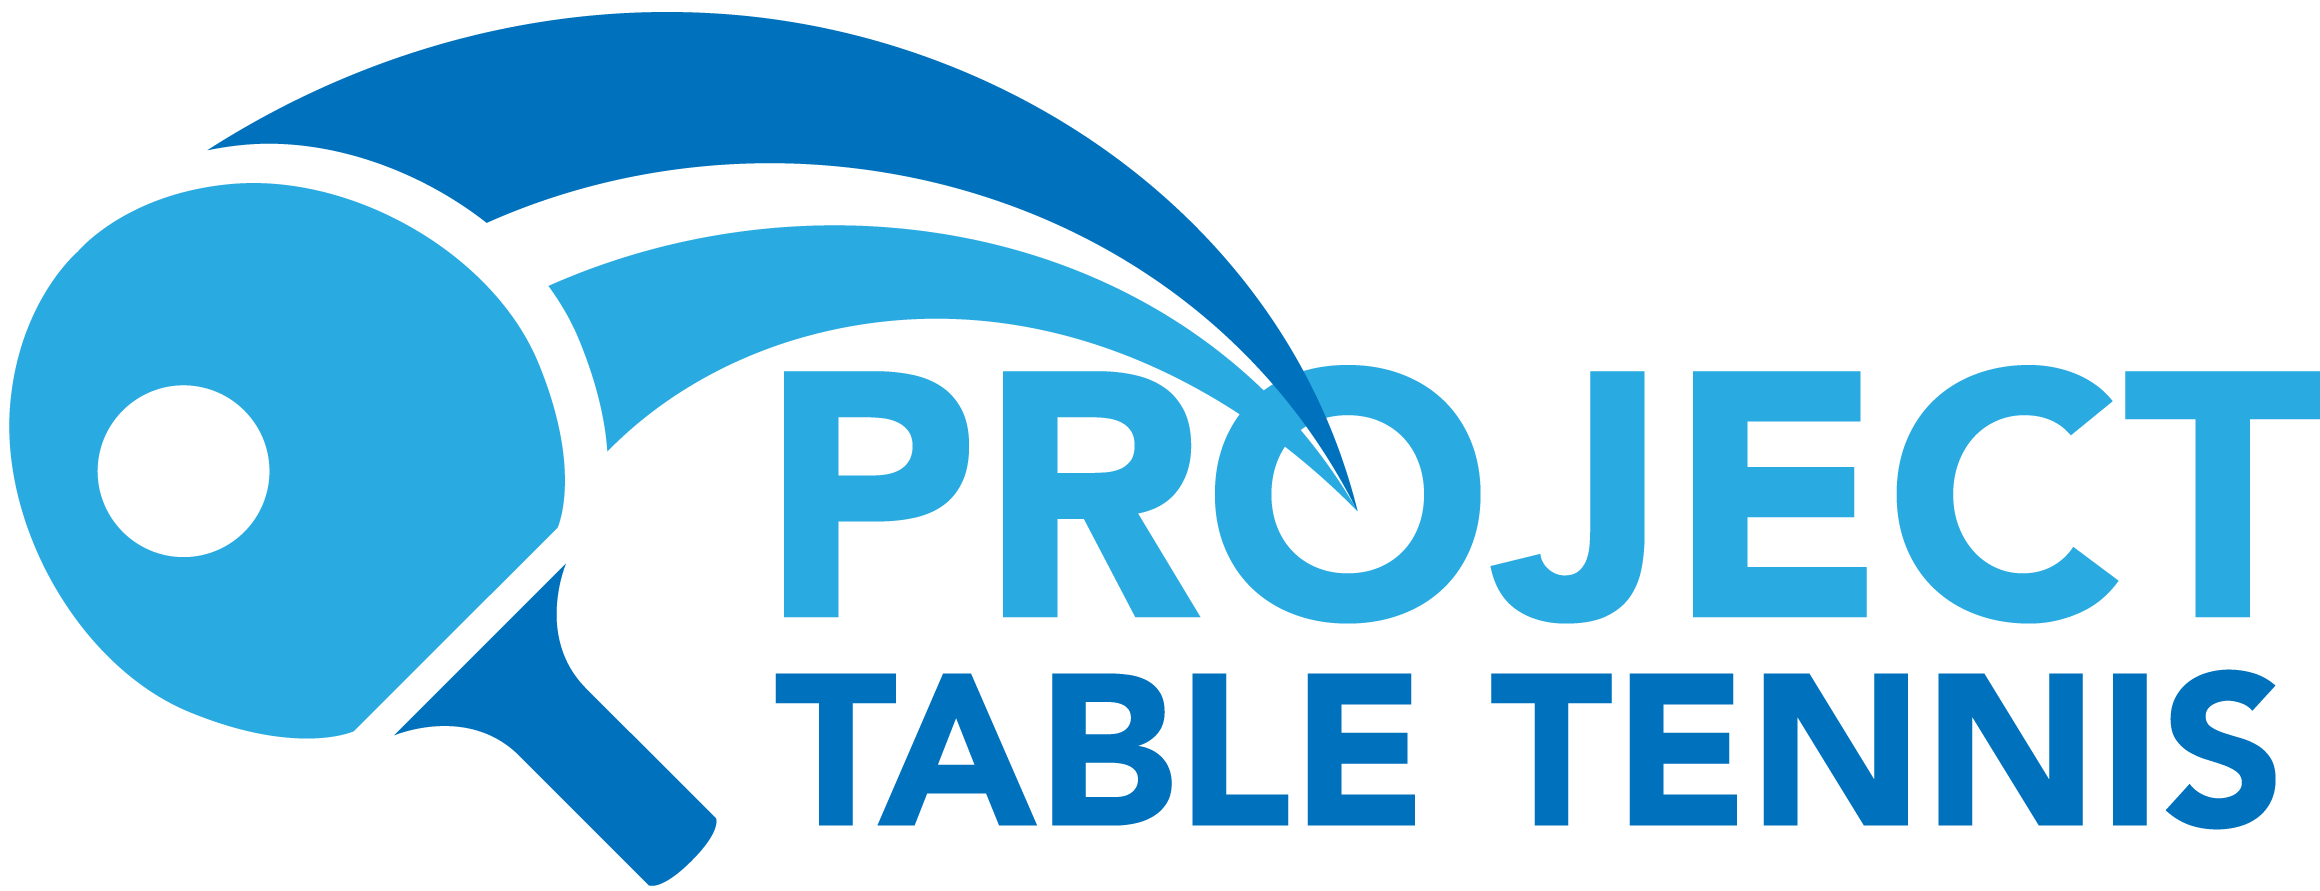 Project Table Tennis